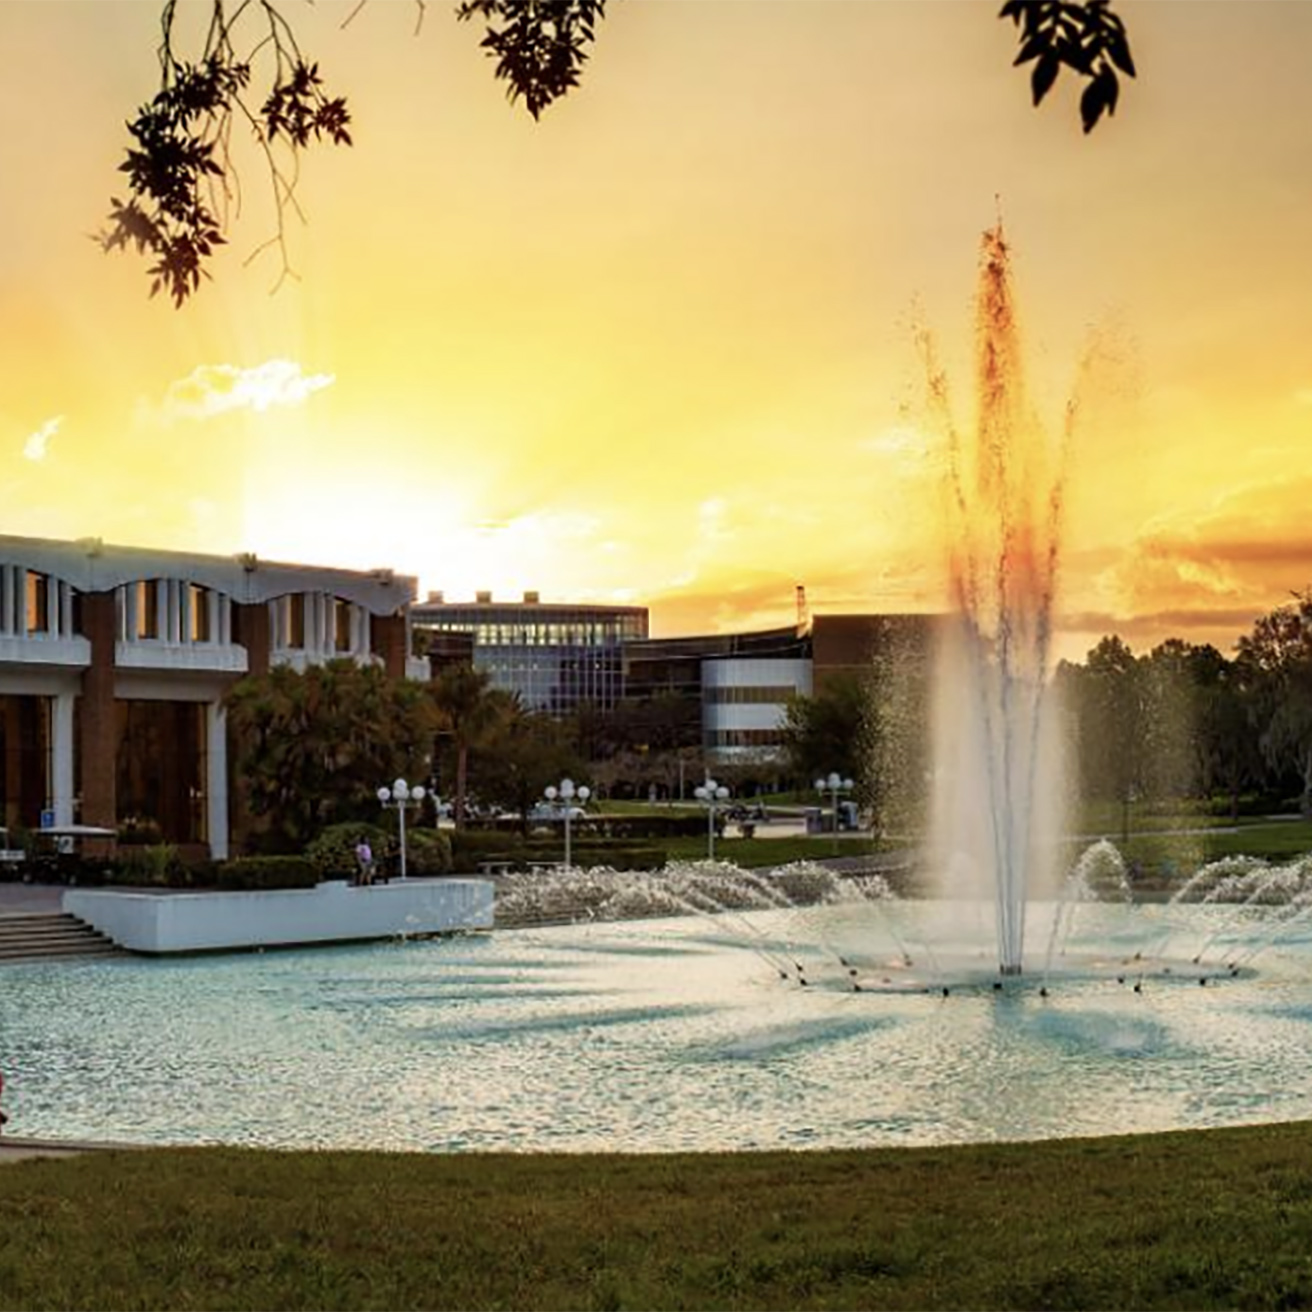 University of Central Florida campus